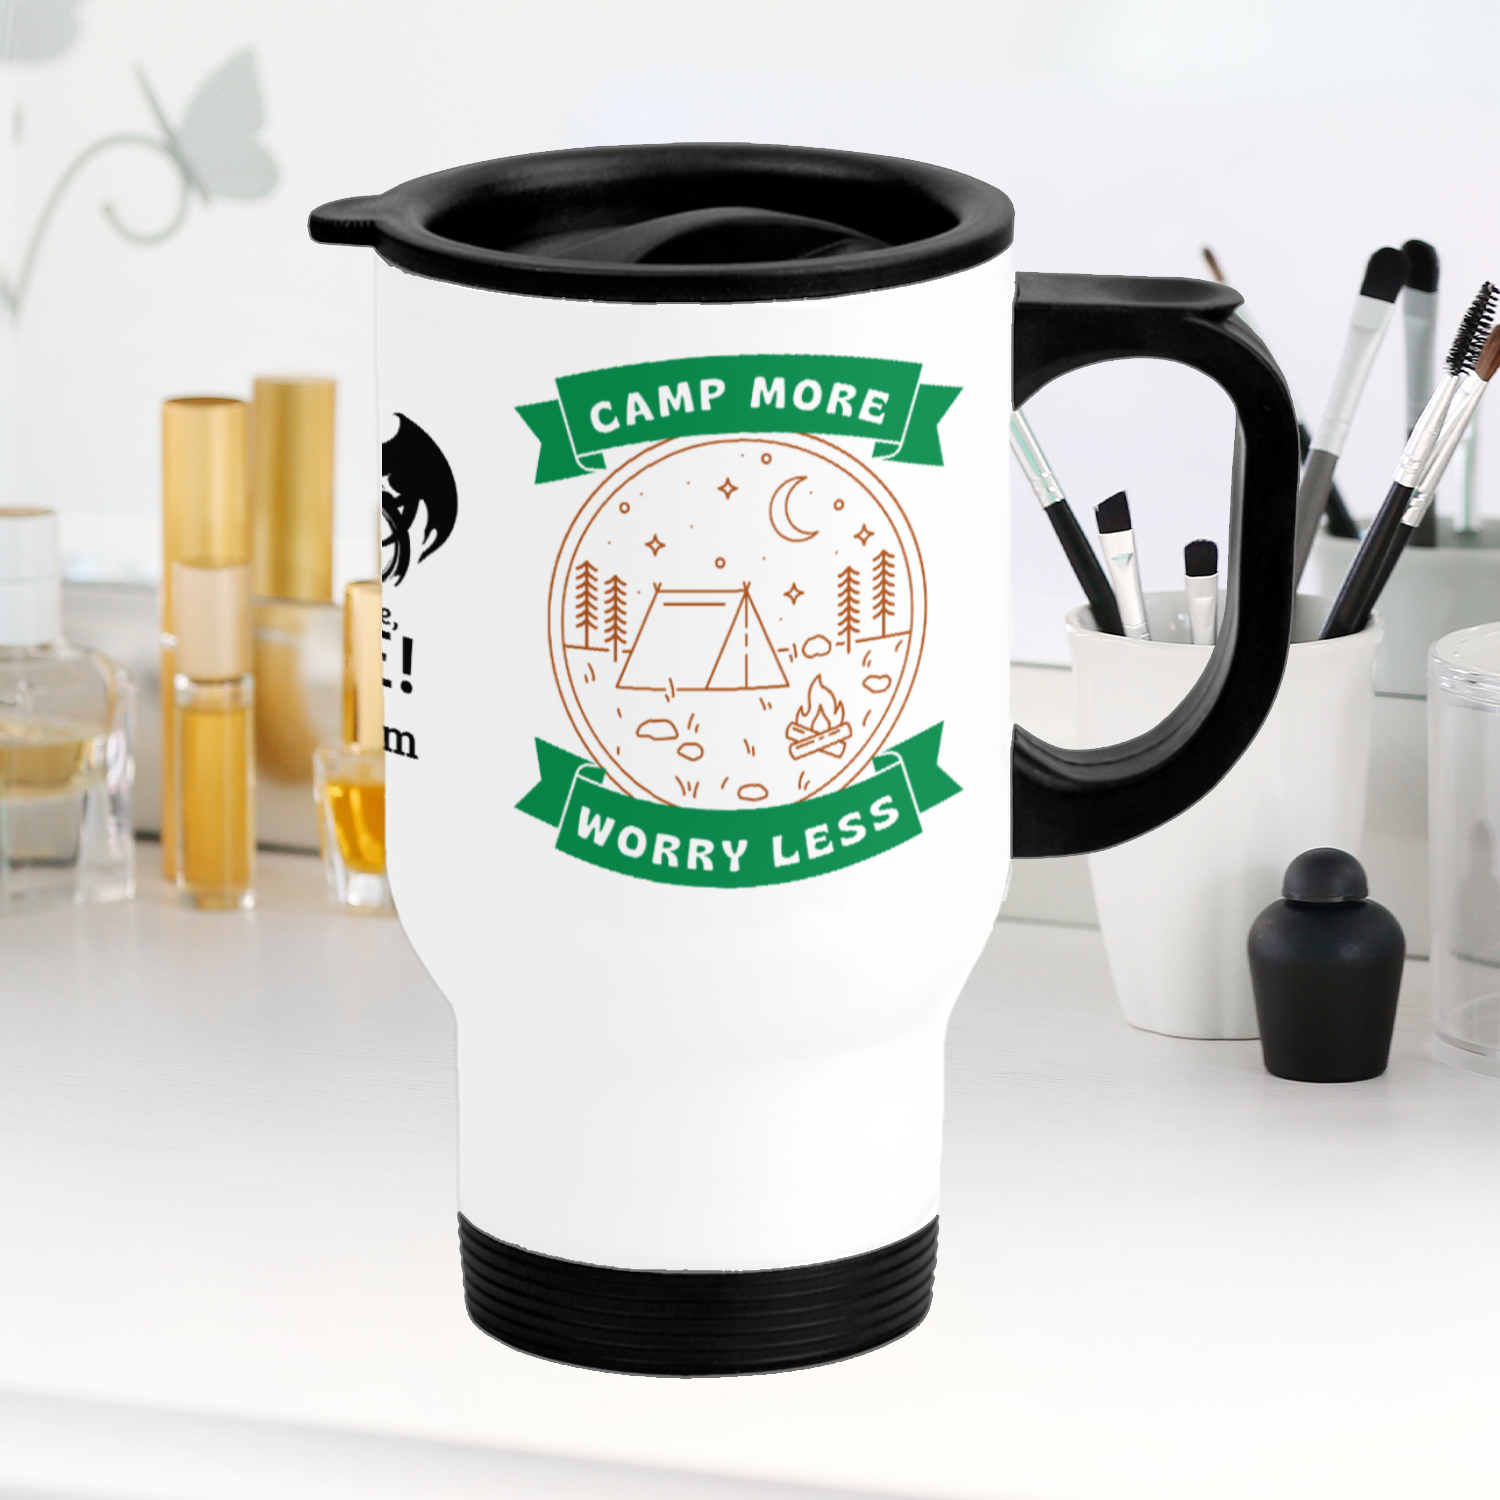 Embrace the great outdoors with our Camp More Worry Less 14oz Stainless Steel Travel Mug! Perfect for keeping your drinks hot or cold while on the go. The durable stainless steel construction and secure lid make it a must-have for any adventurer. Make every sip feel like a mini vacation.